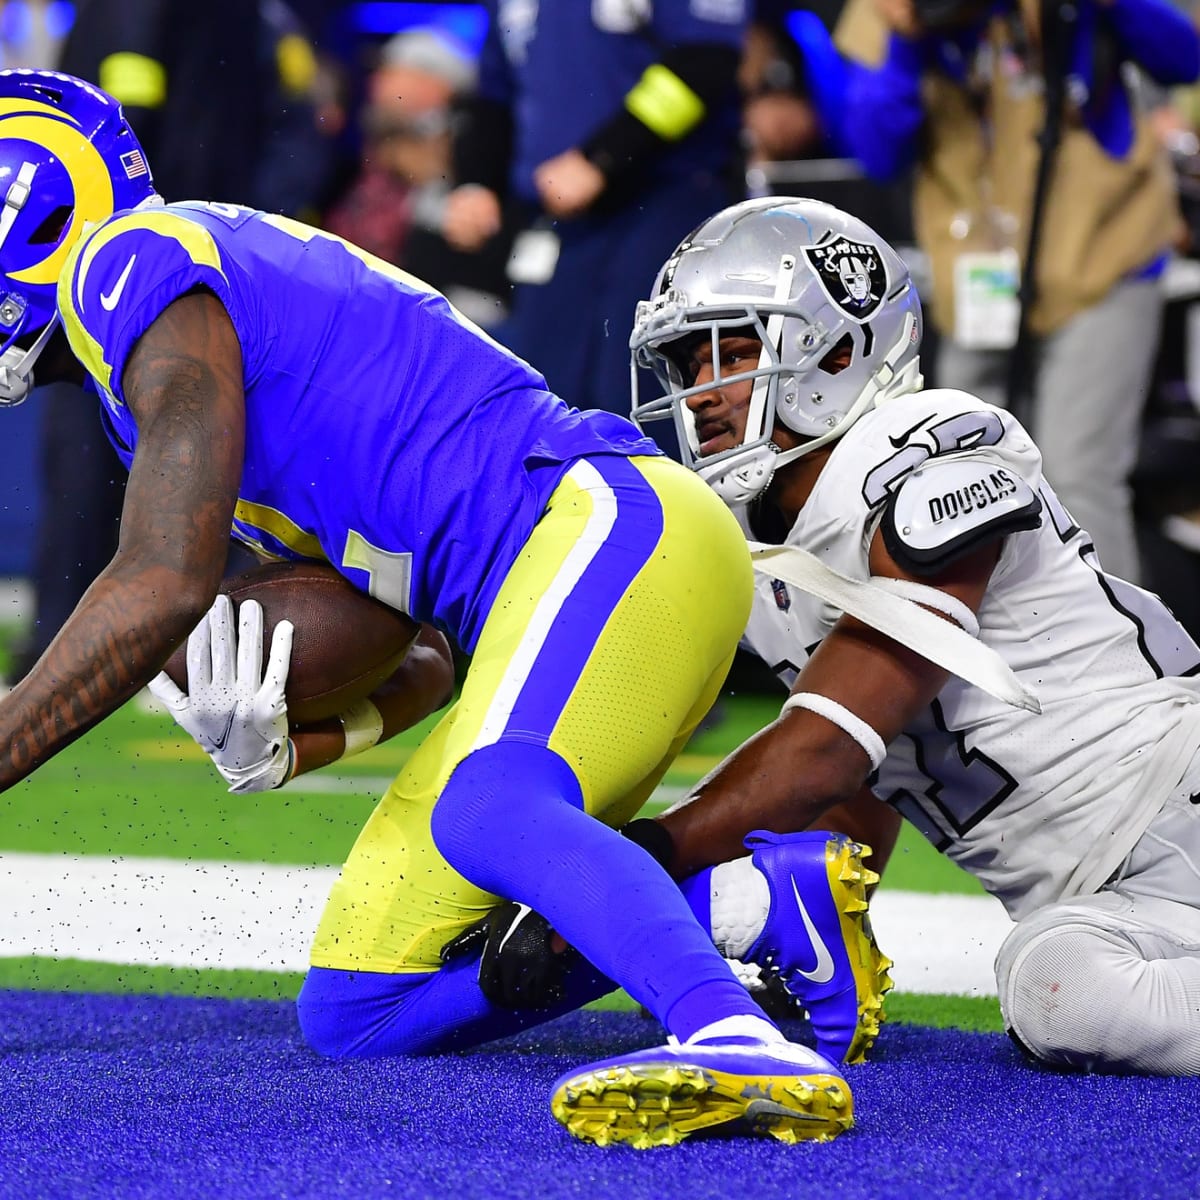 Garrett shines for Rams, but Raiders hold on for 17-16 win